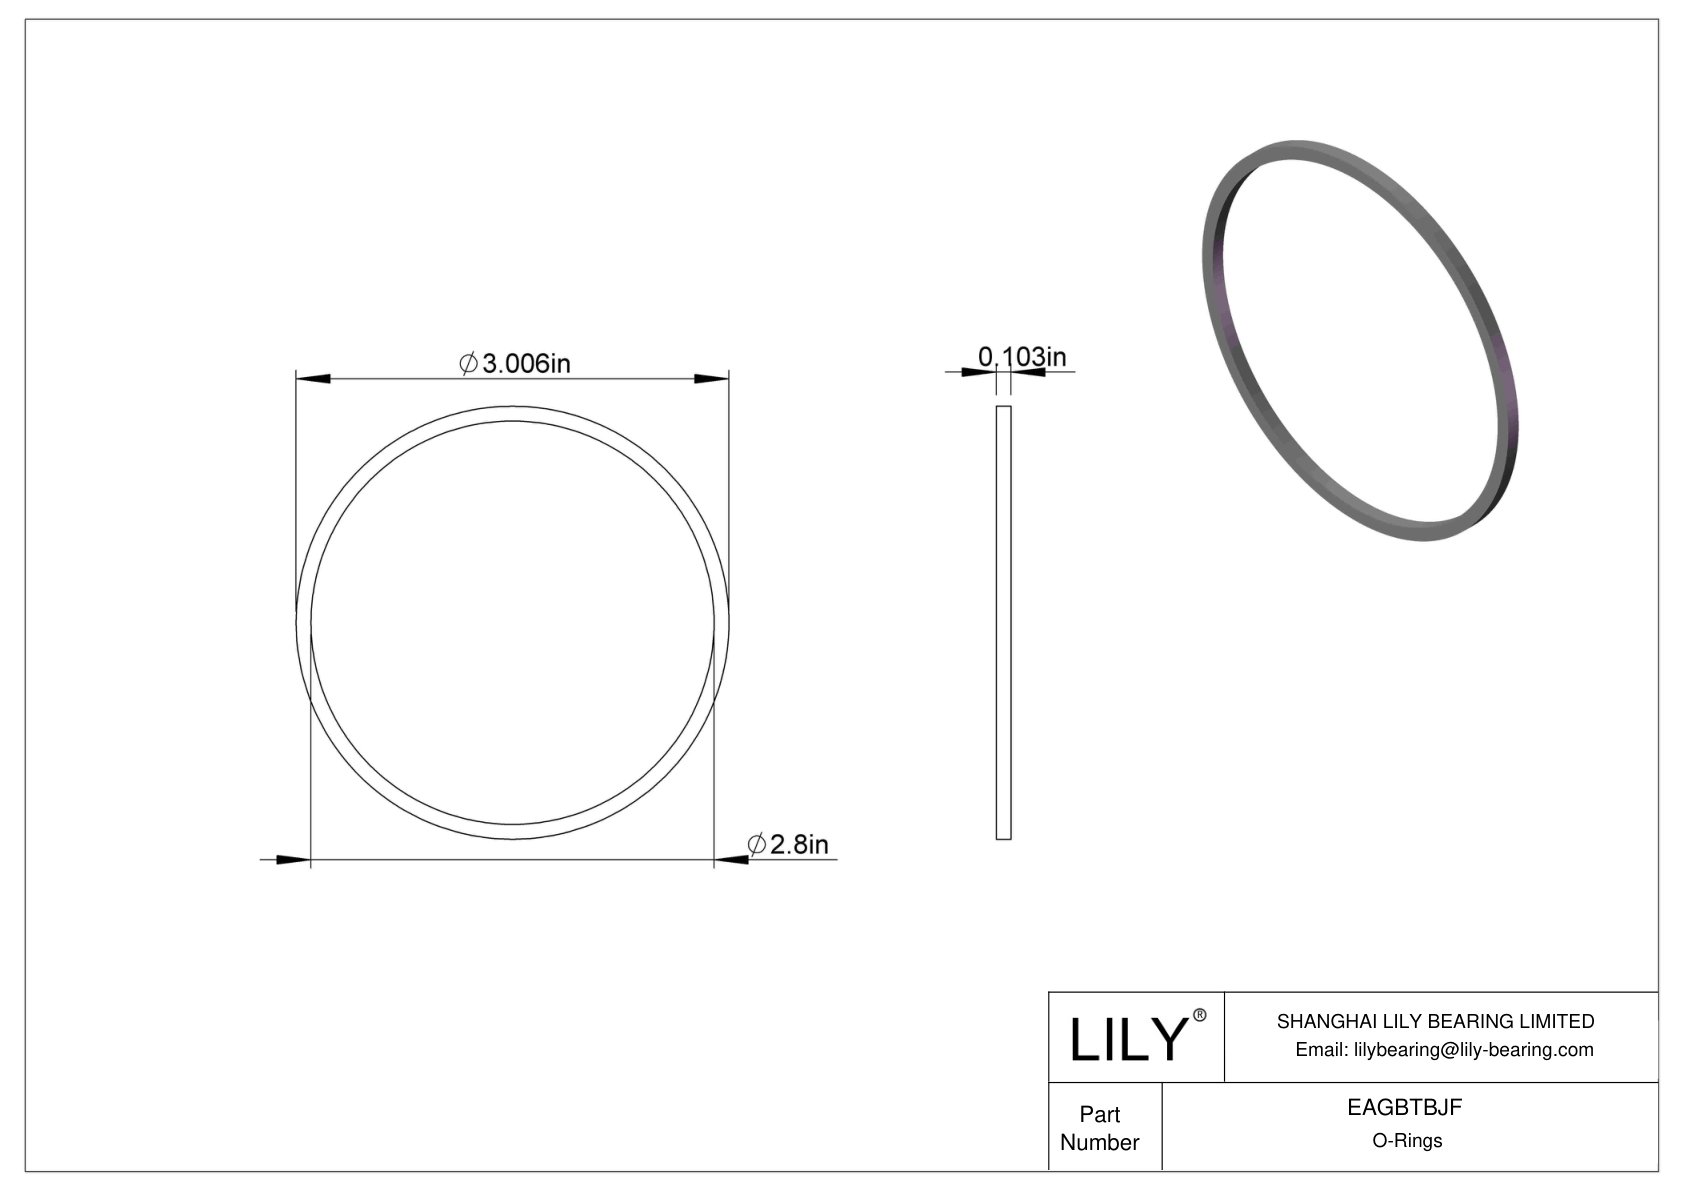 EAGBTBJF Oil Resistant O-Rings Square cad drawing